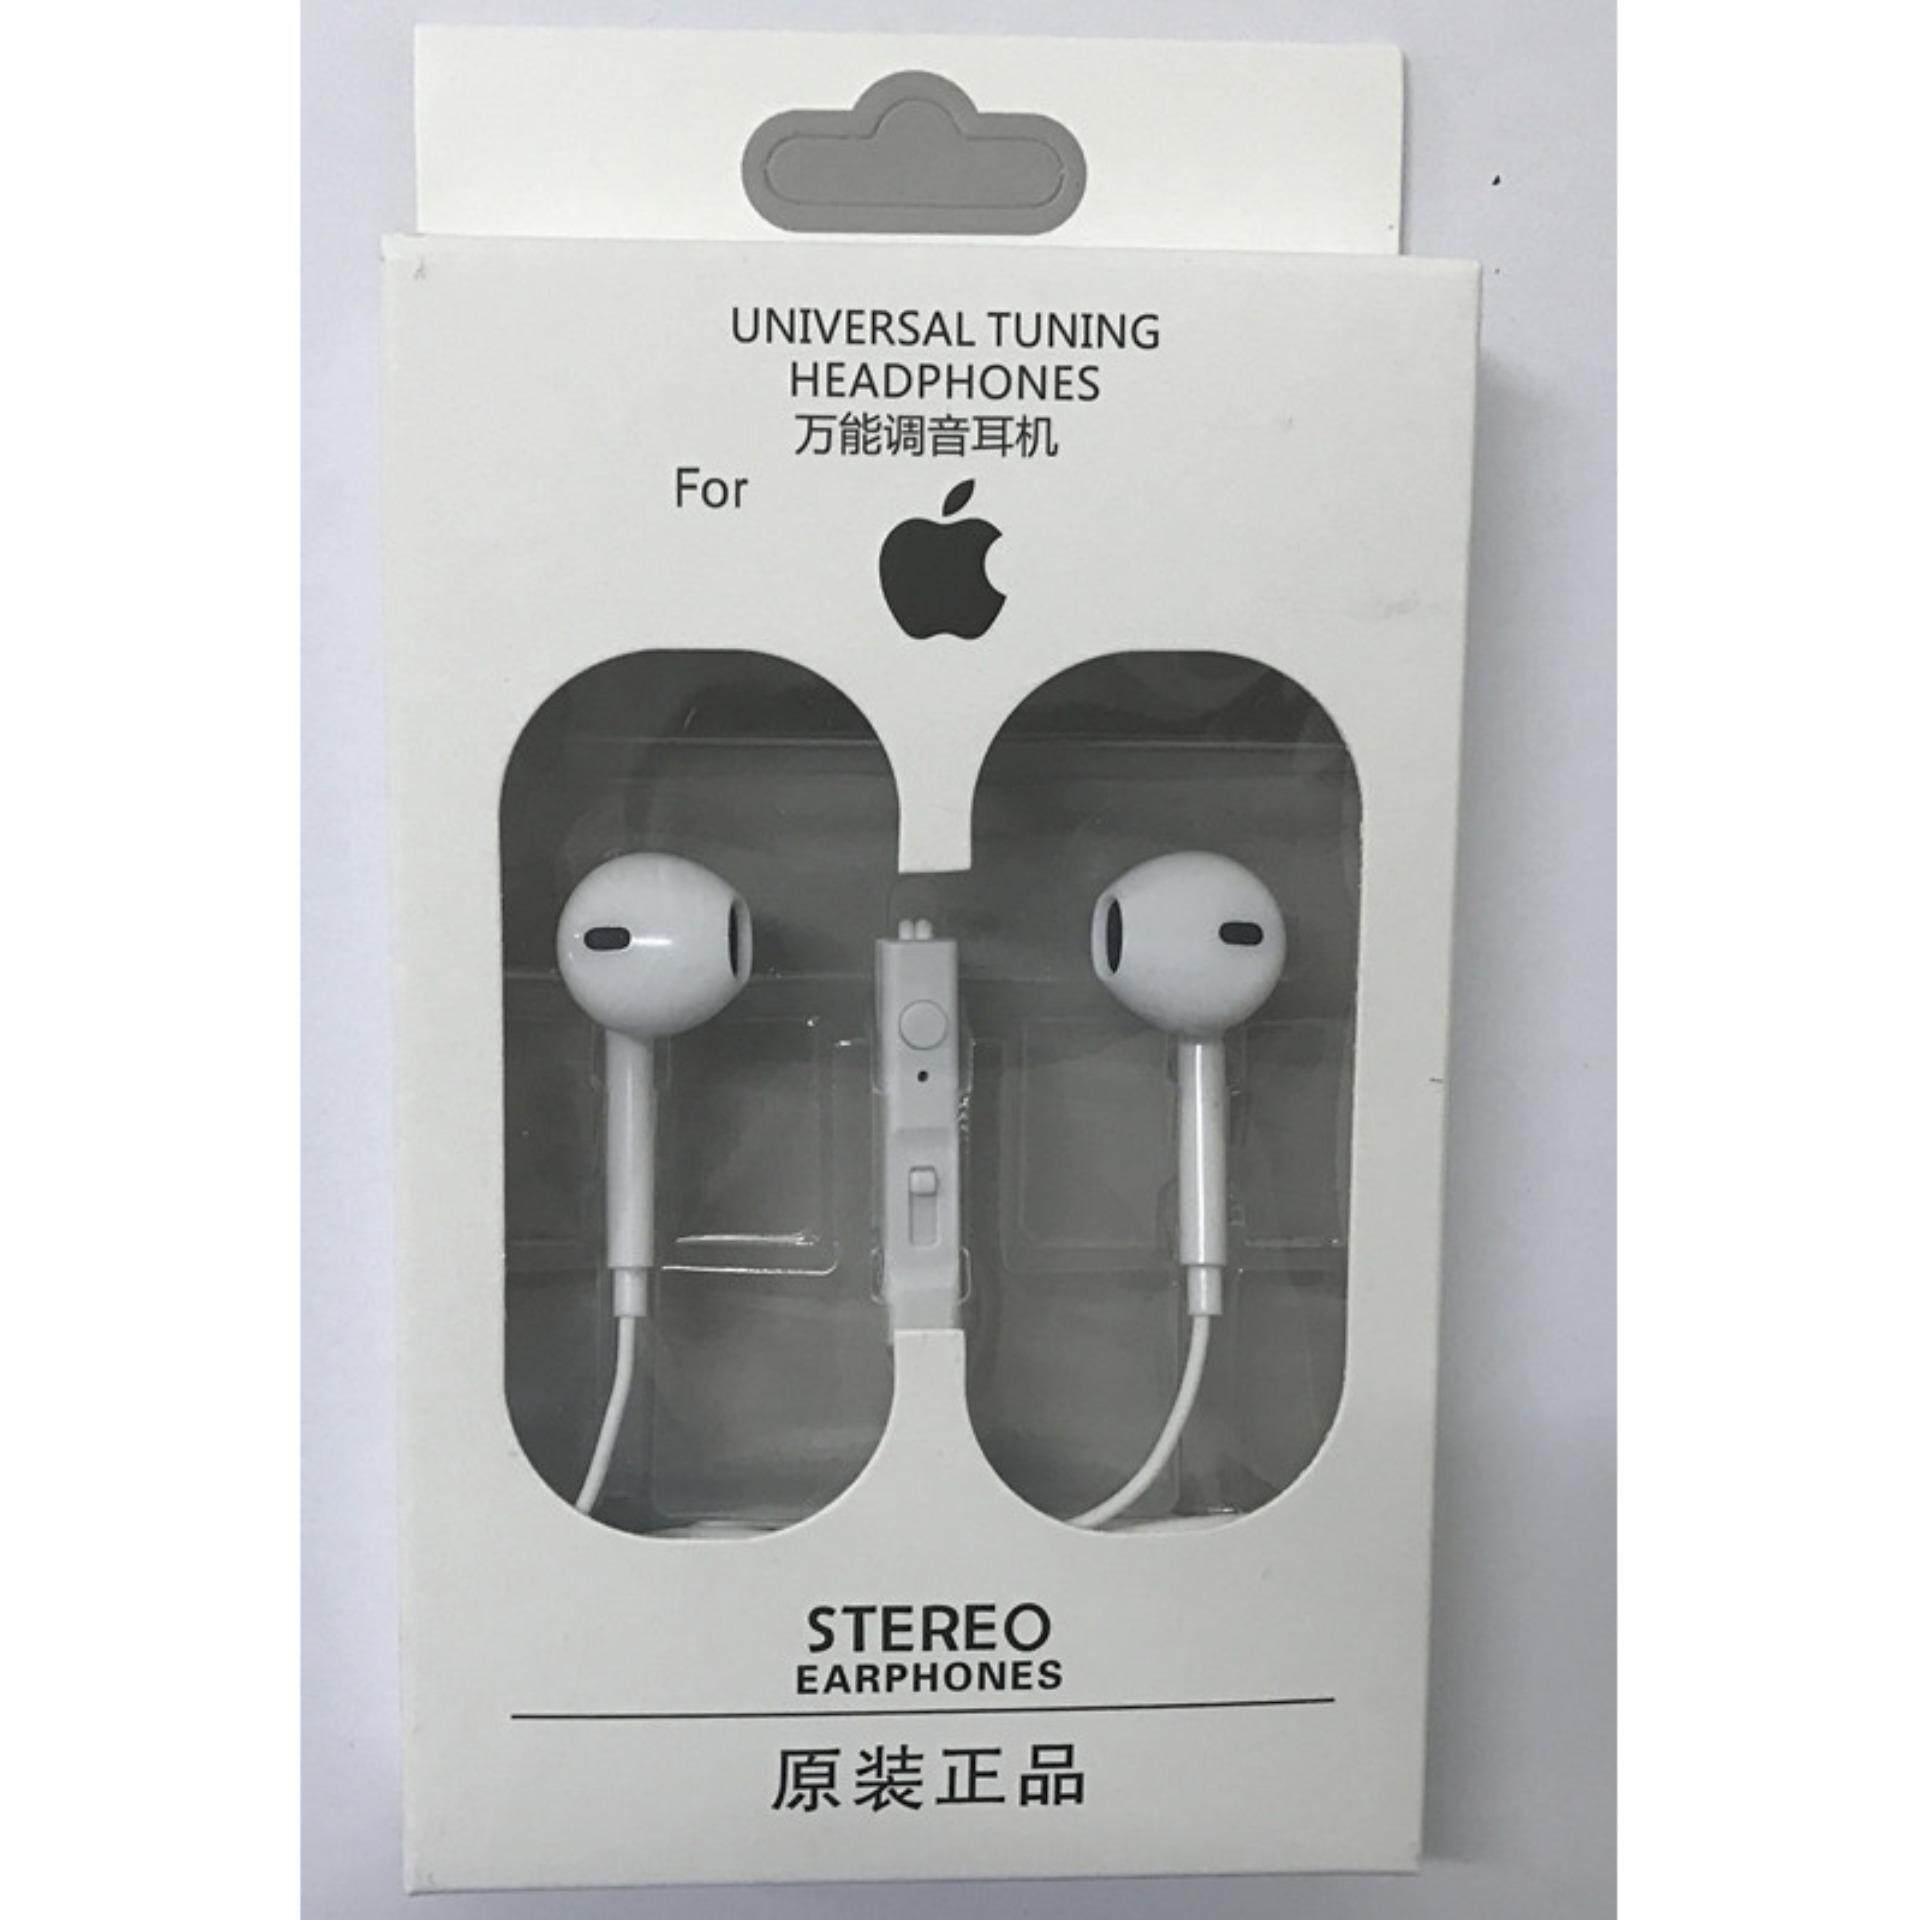 Universal Tuning Headphone for Mi Mobile, iPhone, Samsung, Huawai, Vivo and others